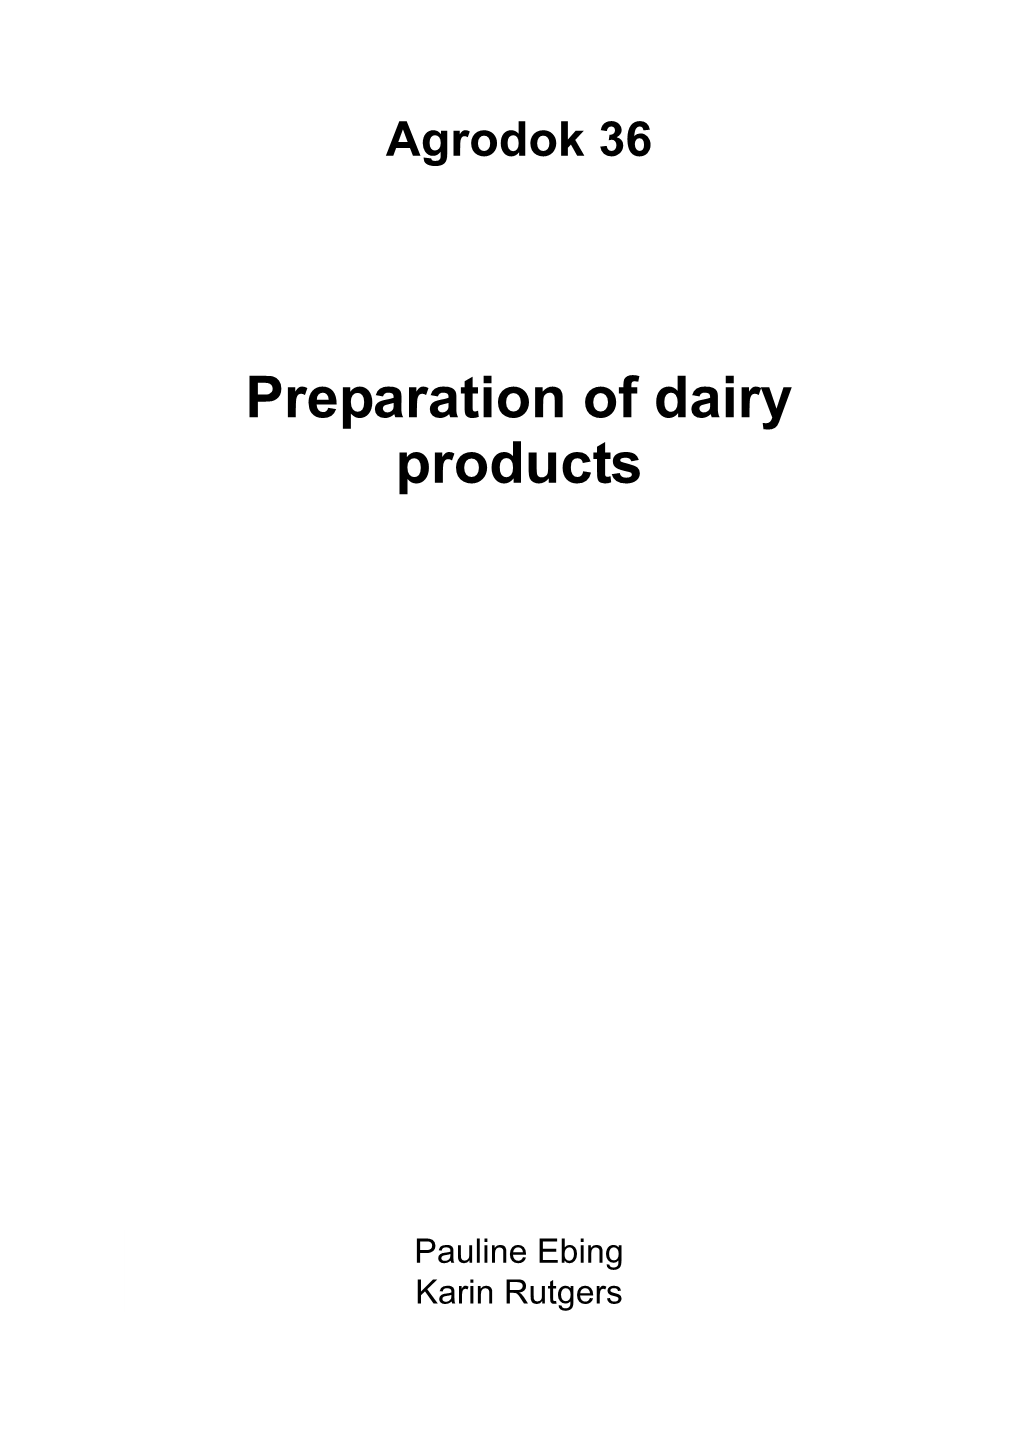 Preparation of Dairy Products